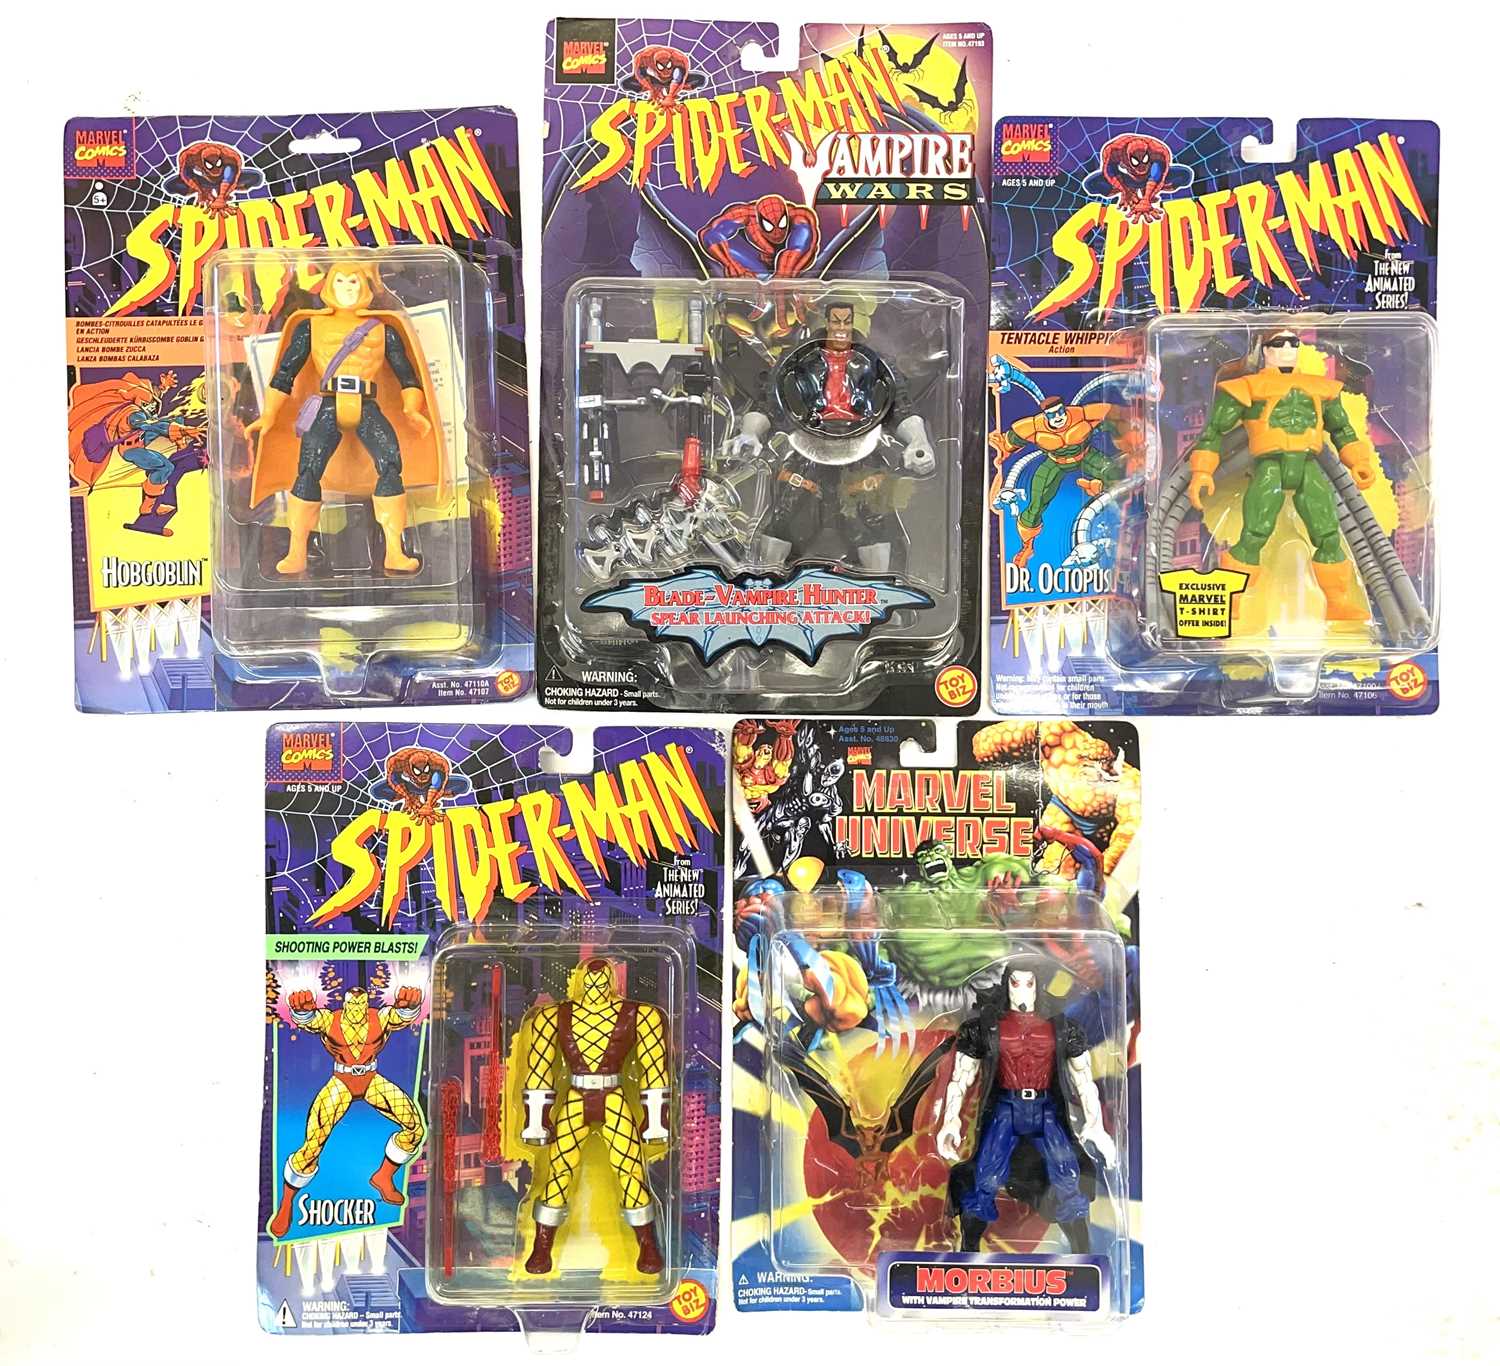 A mixed lot of highly collectible vintage 1990s ToyBiz Spider-Man collectible figurines in